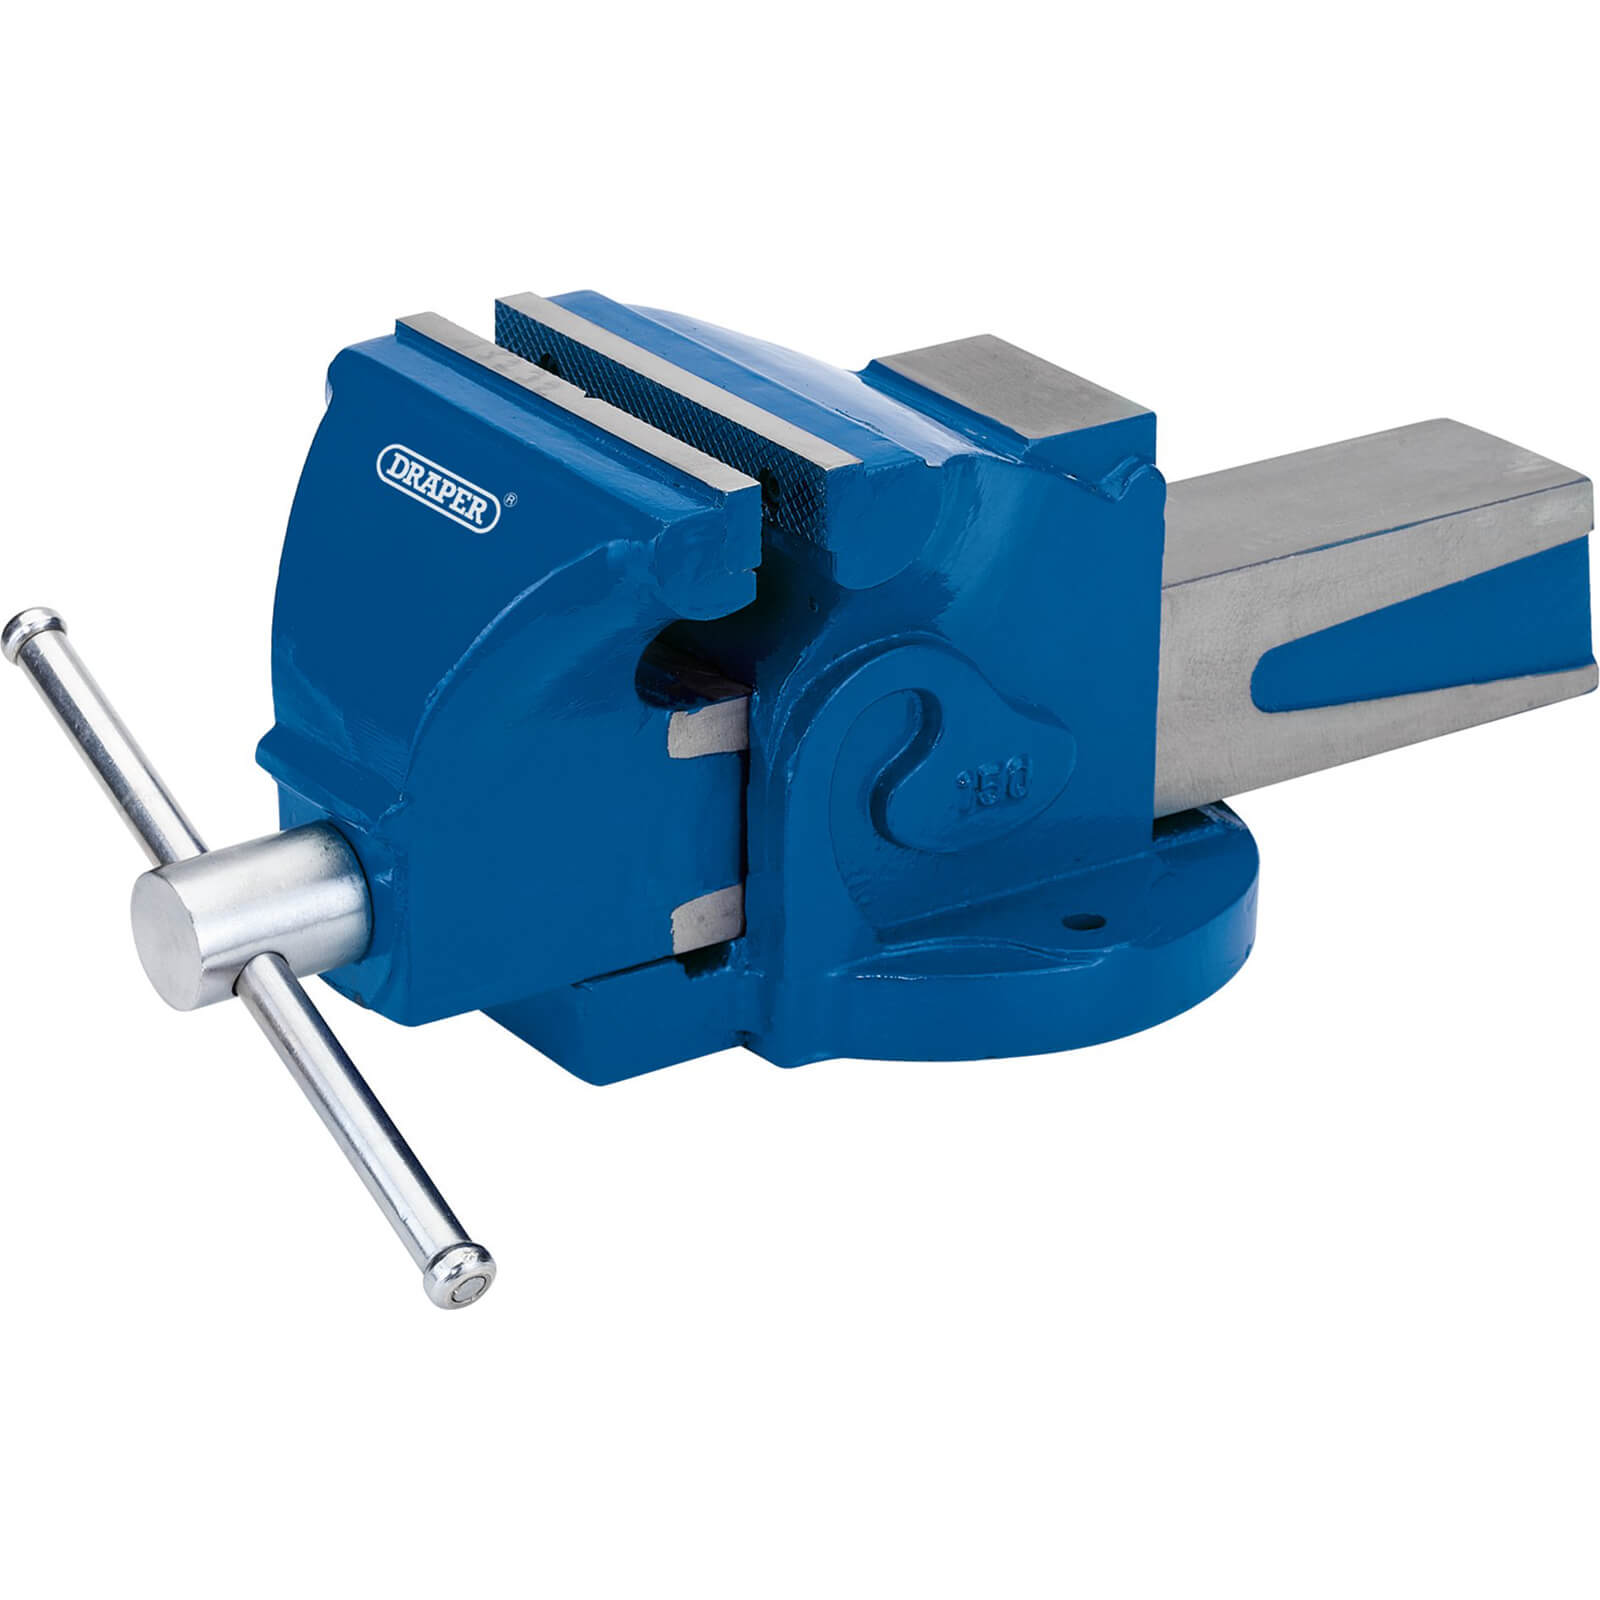 Image of Draper Engineers Bench Vice 125mm